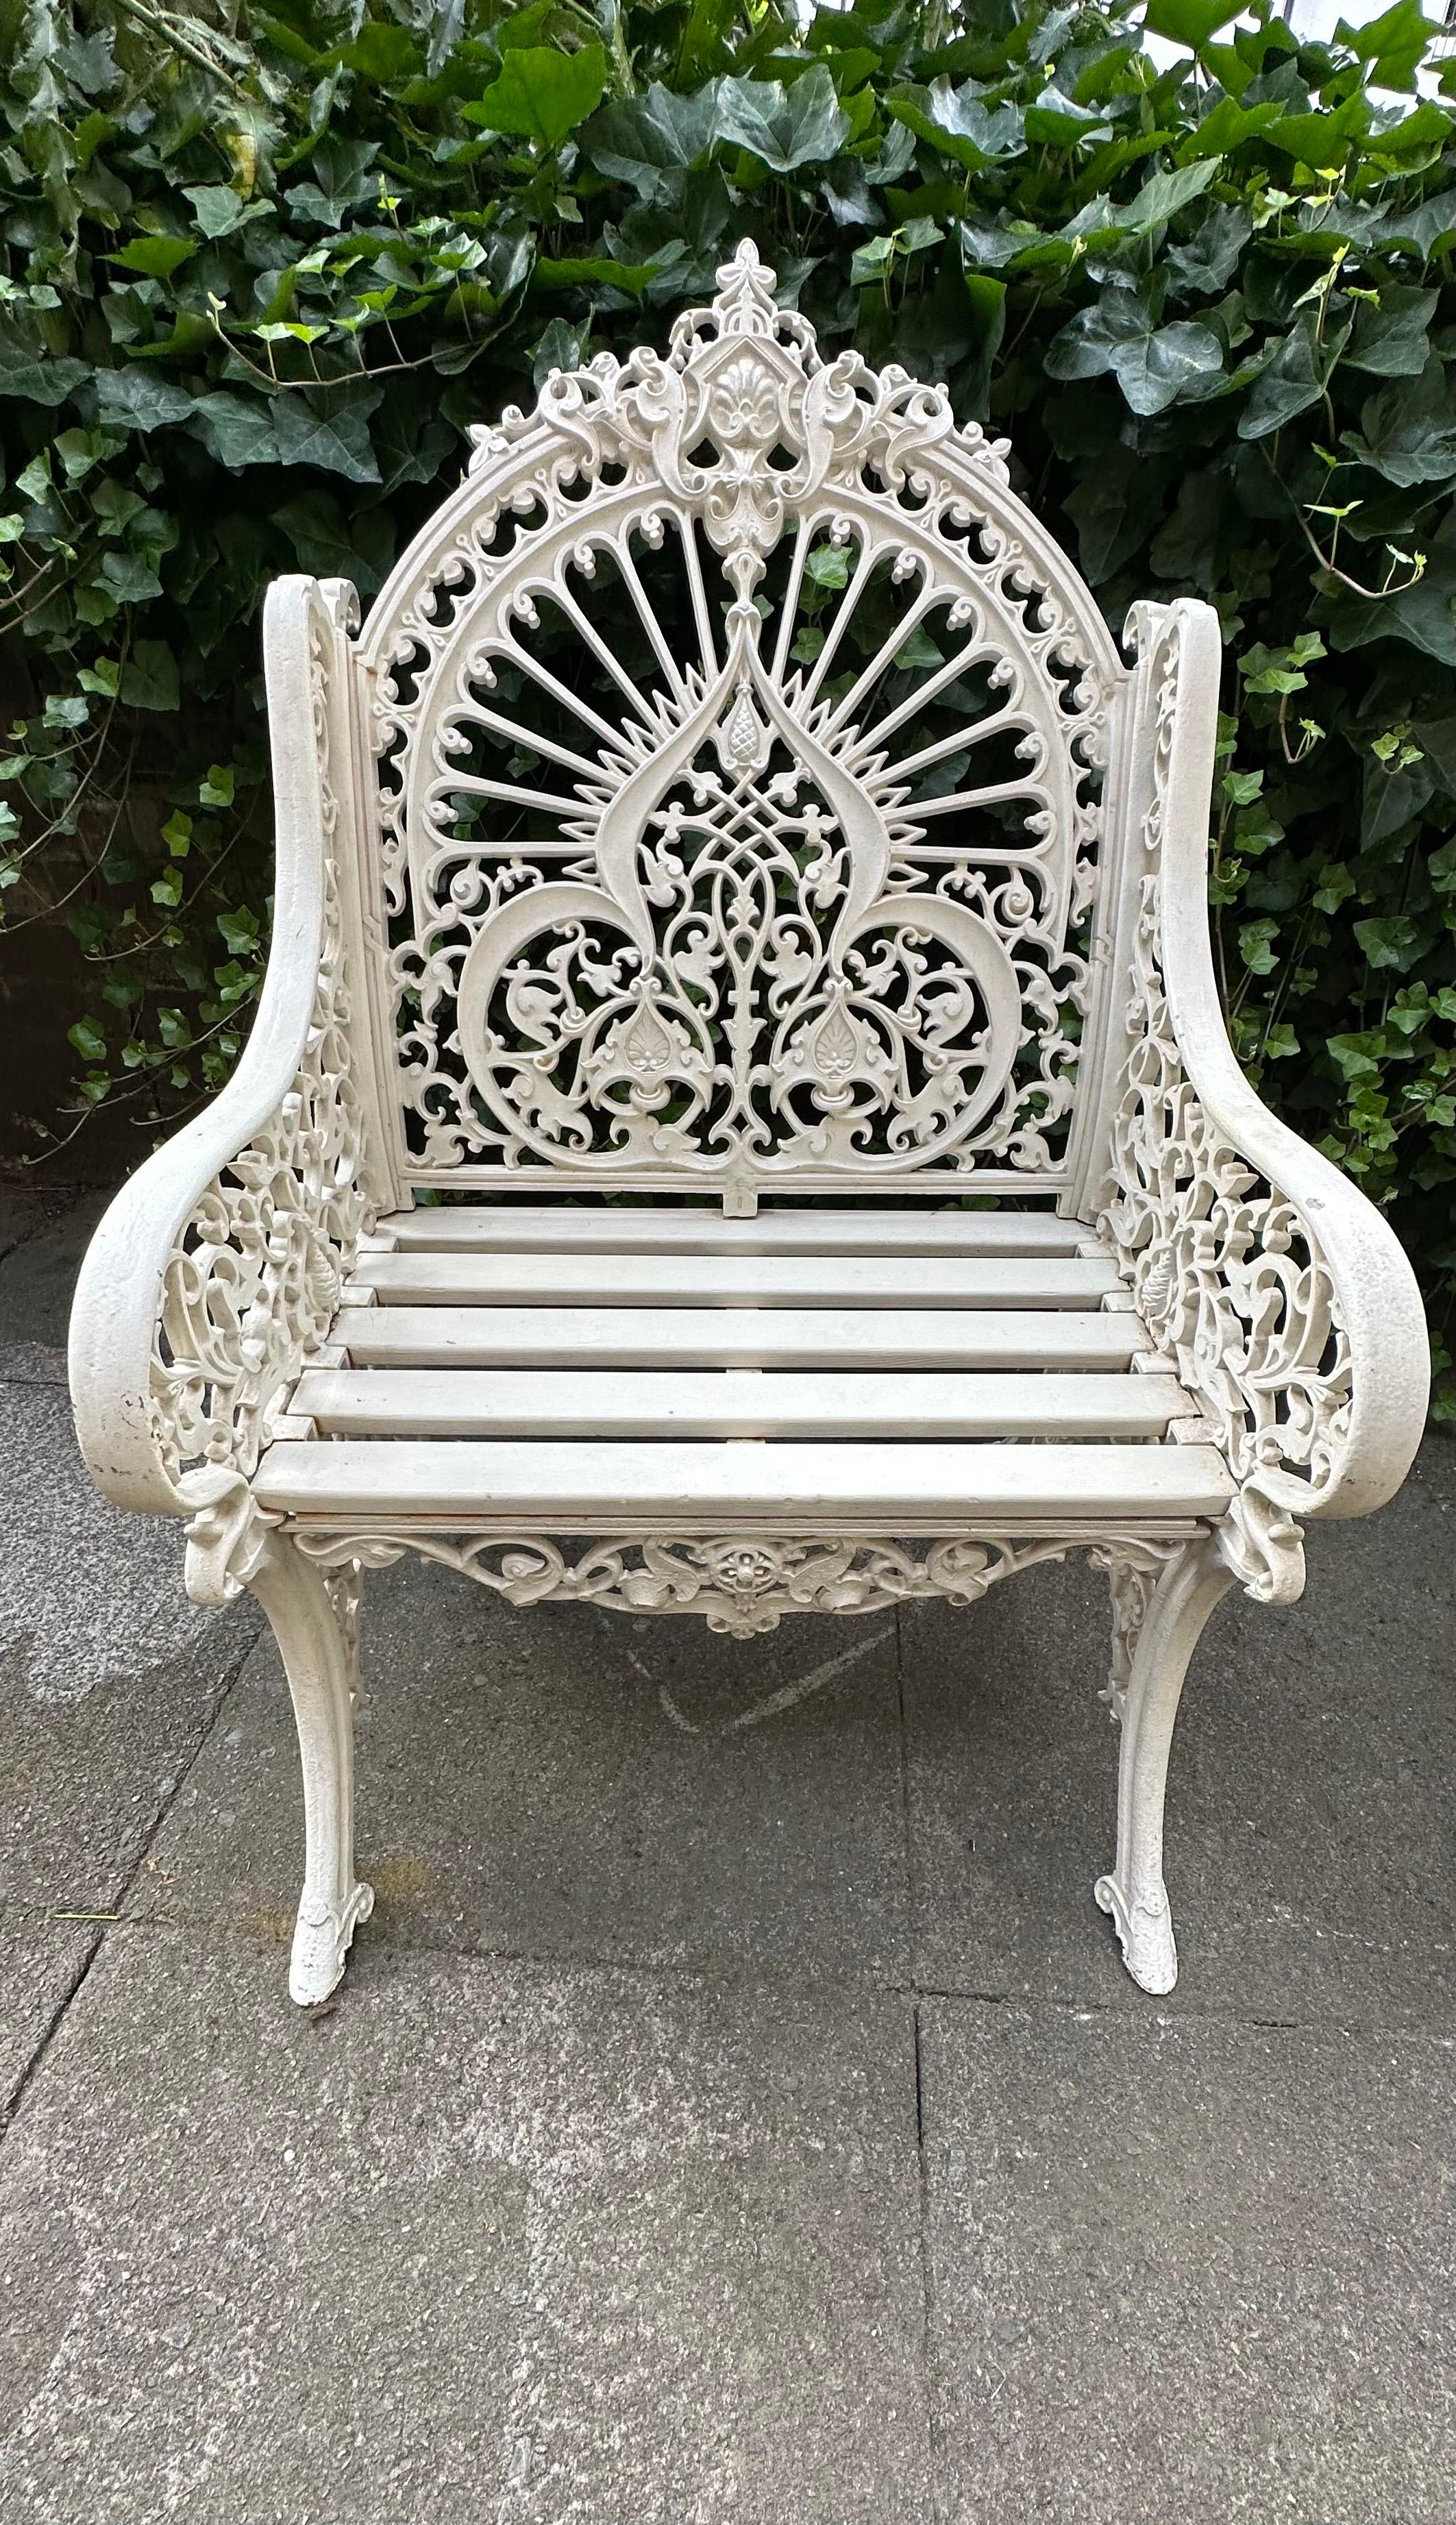 Iron Original Coalbrookdale Peacock Chairs design mark 90928 & stamped year 1853. For Sale